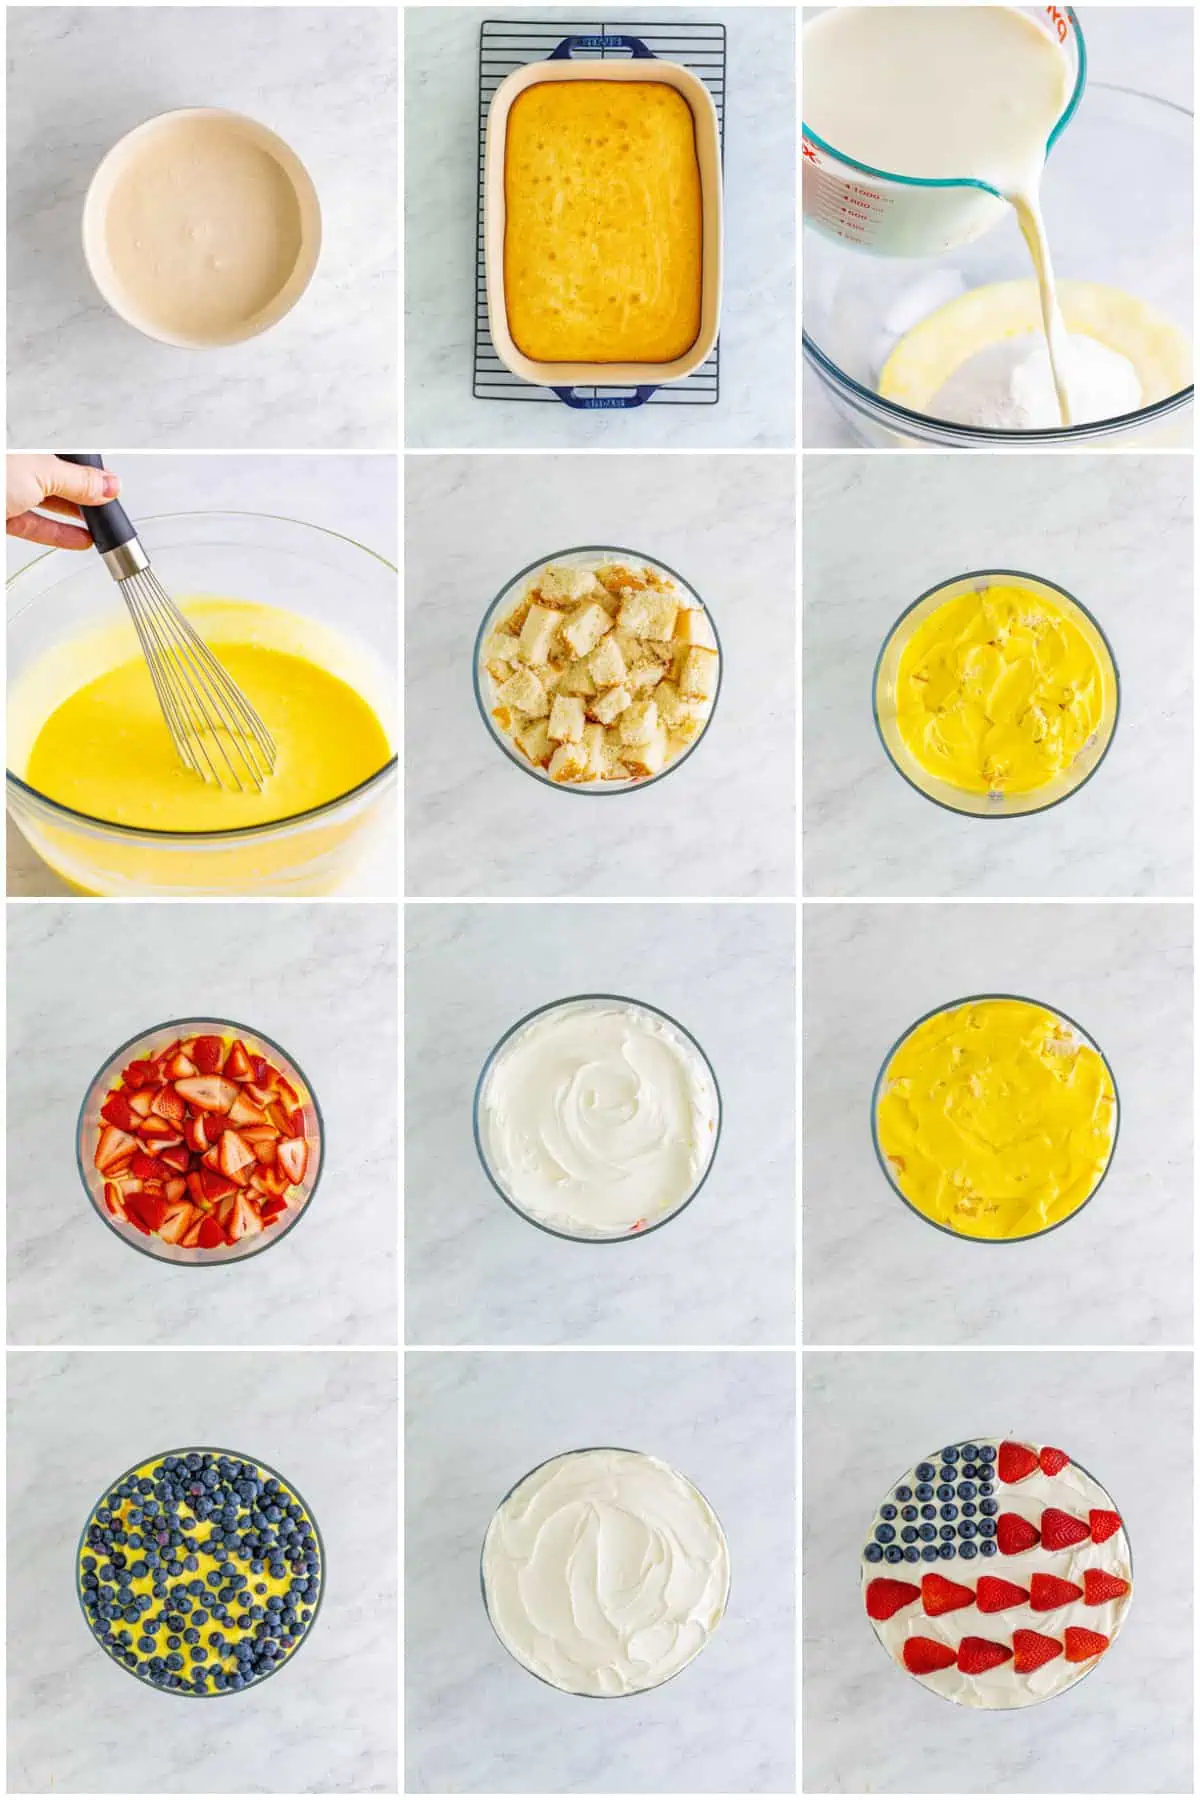 Step by step photos on how to make a Patriotic Trifle.